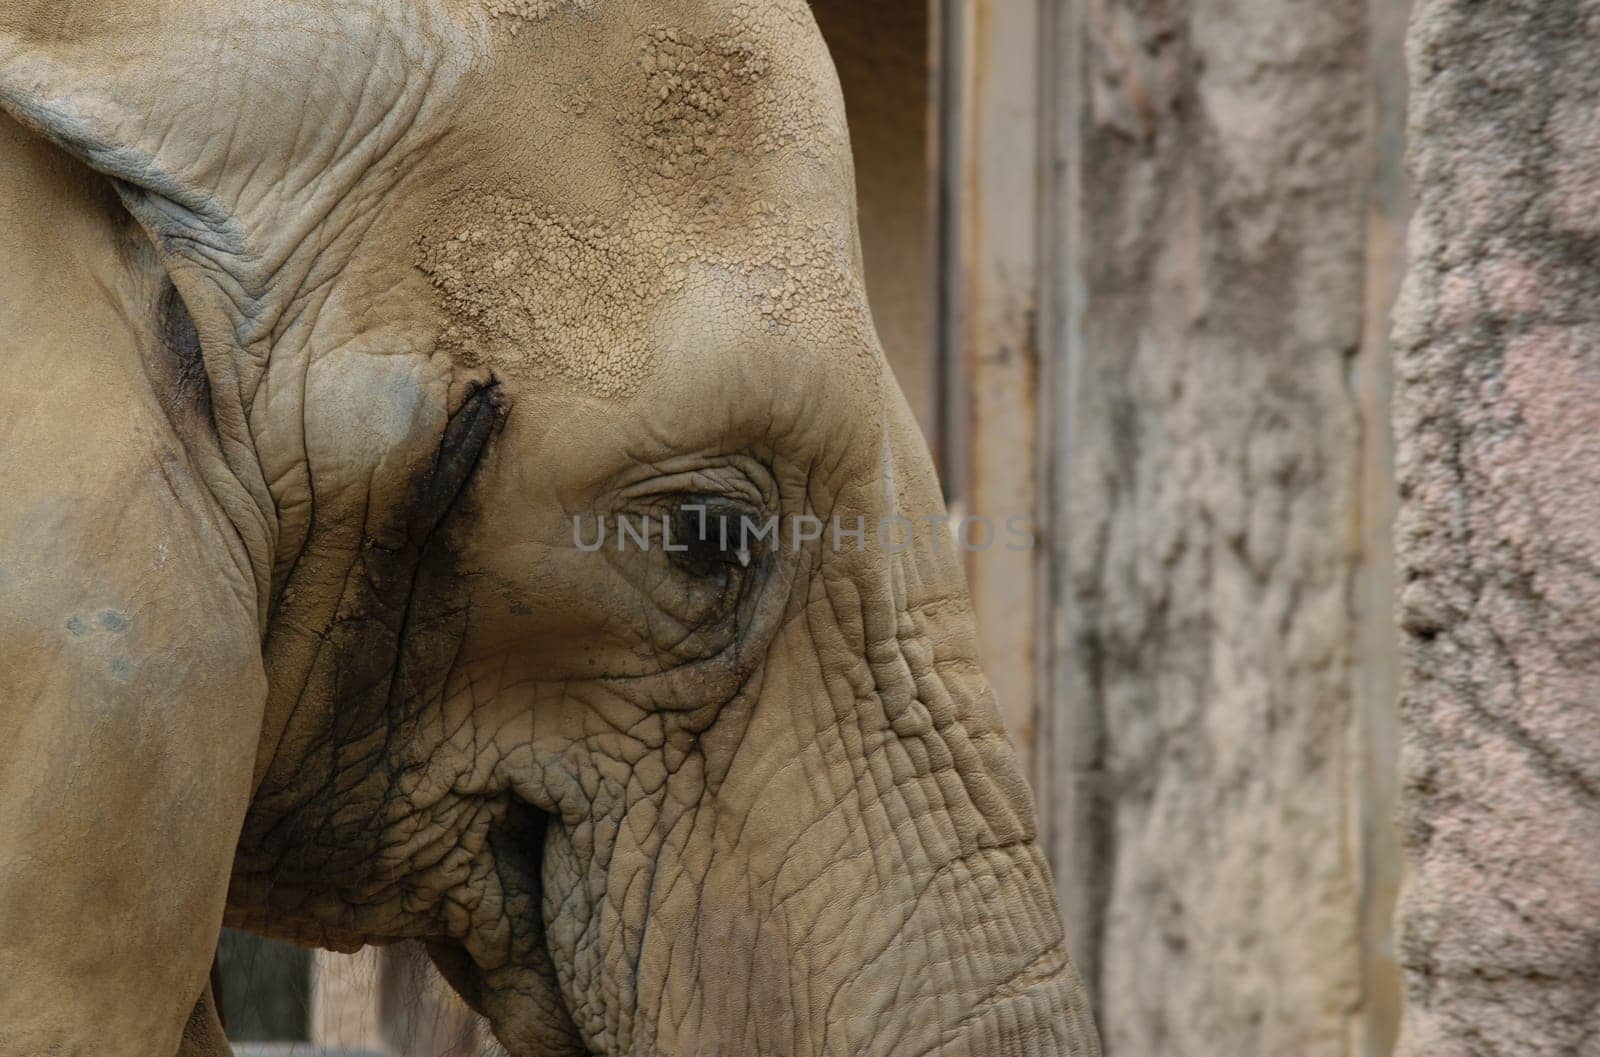 A side profile of an elephant with its eye slightly closed